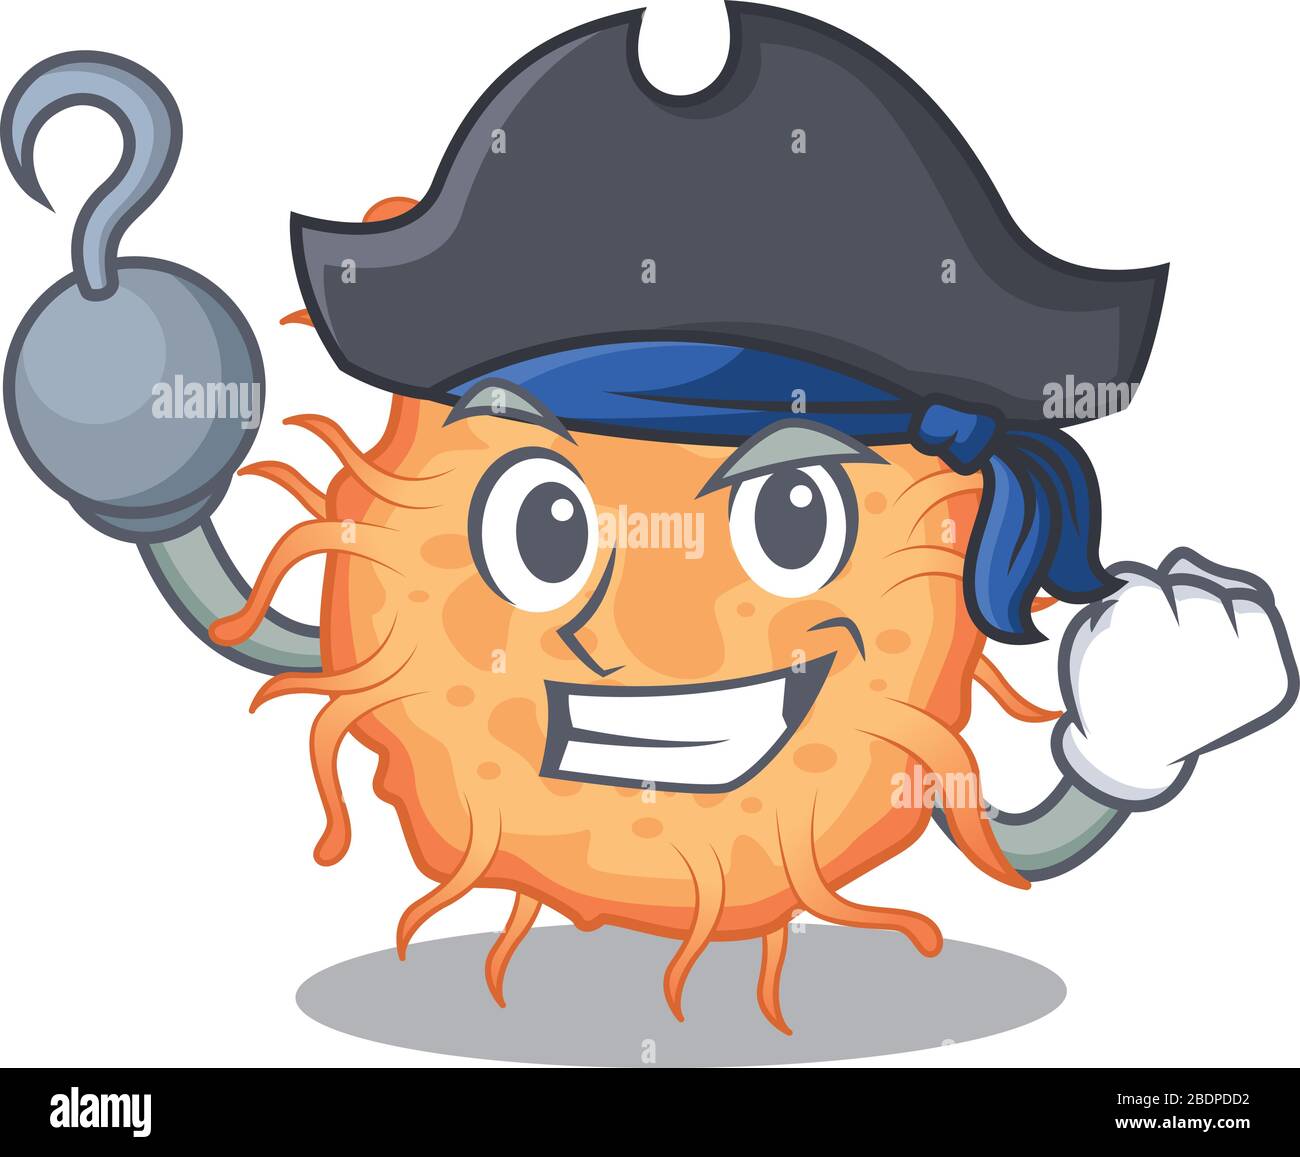 Bacteria endospore cartoon design style as a Pirate with hook hand and a hat Stock Vector